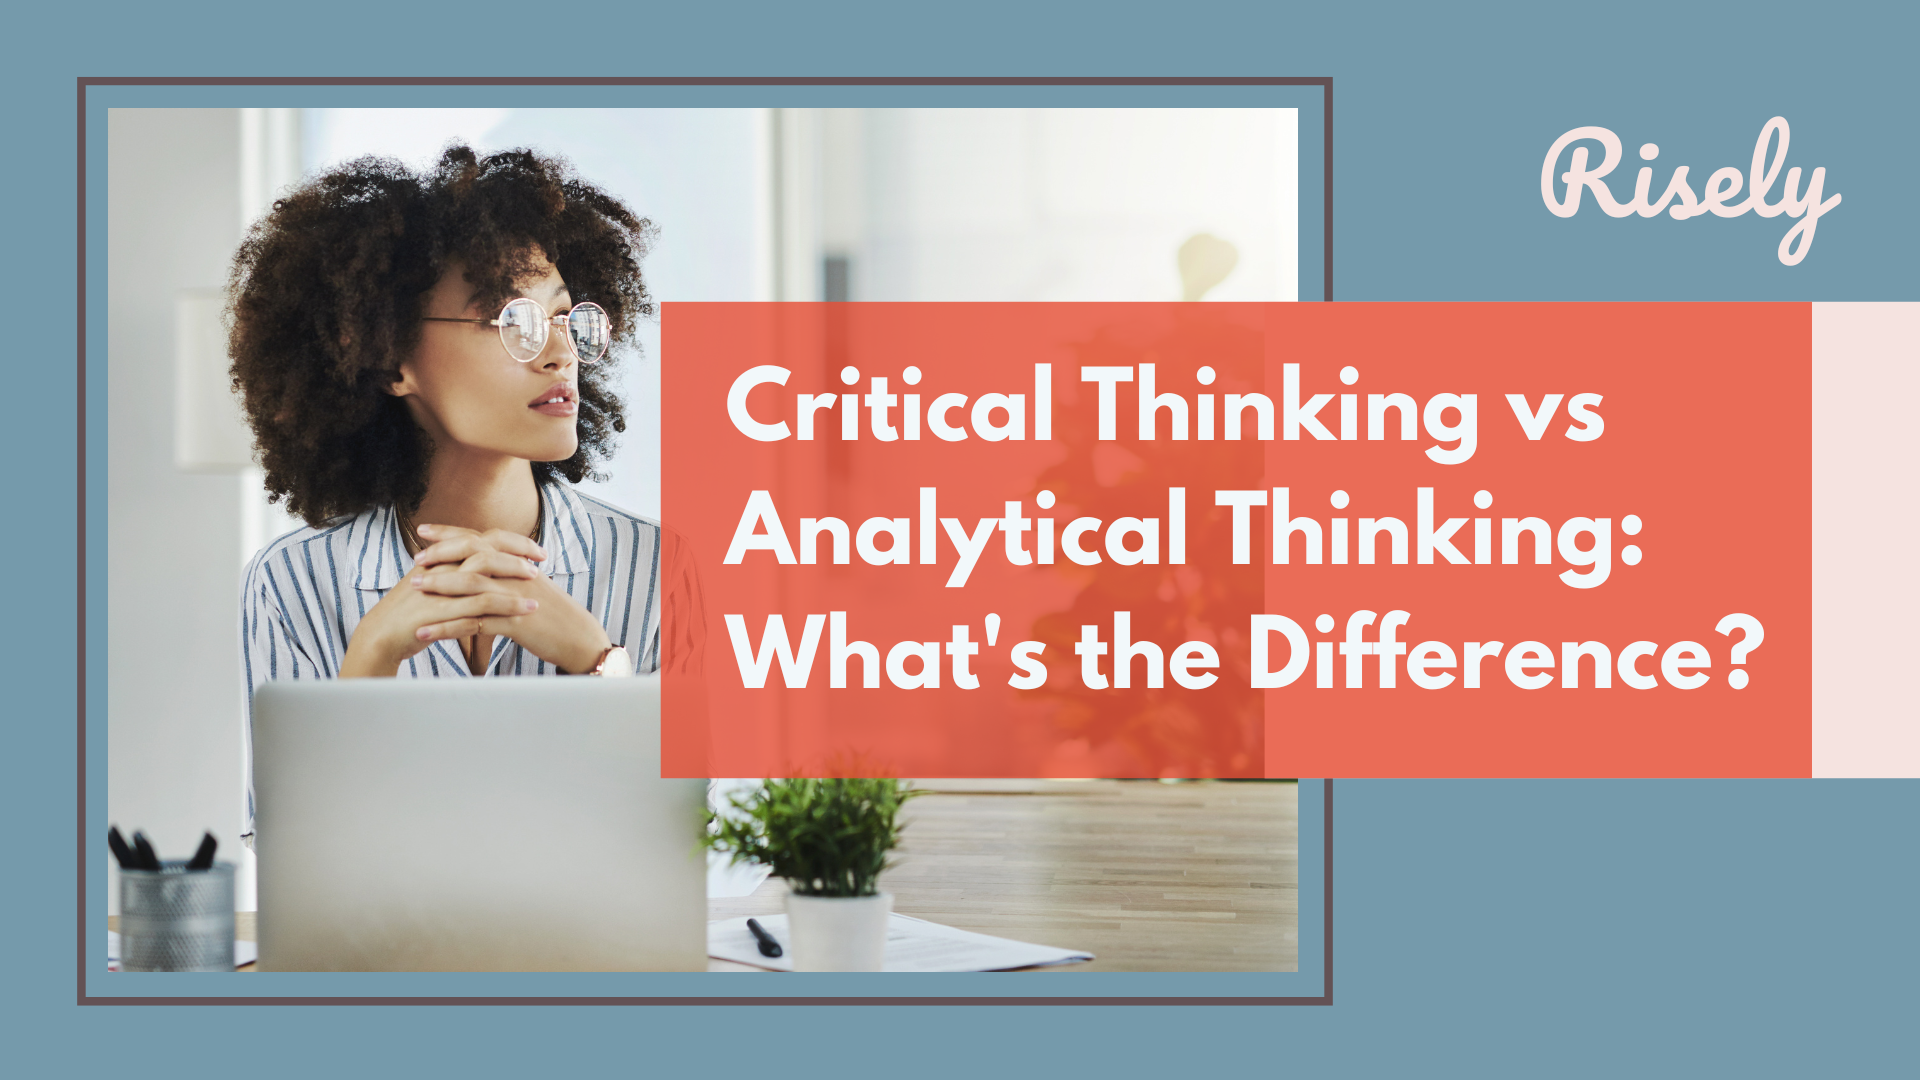 Critical Thinking vs Analytical Thinking: What’s the Difference?